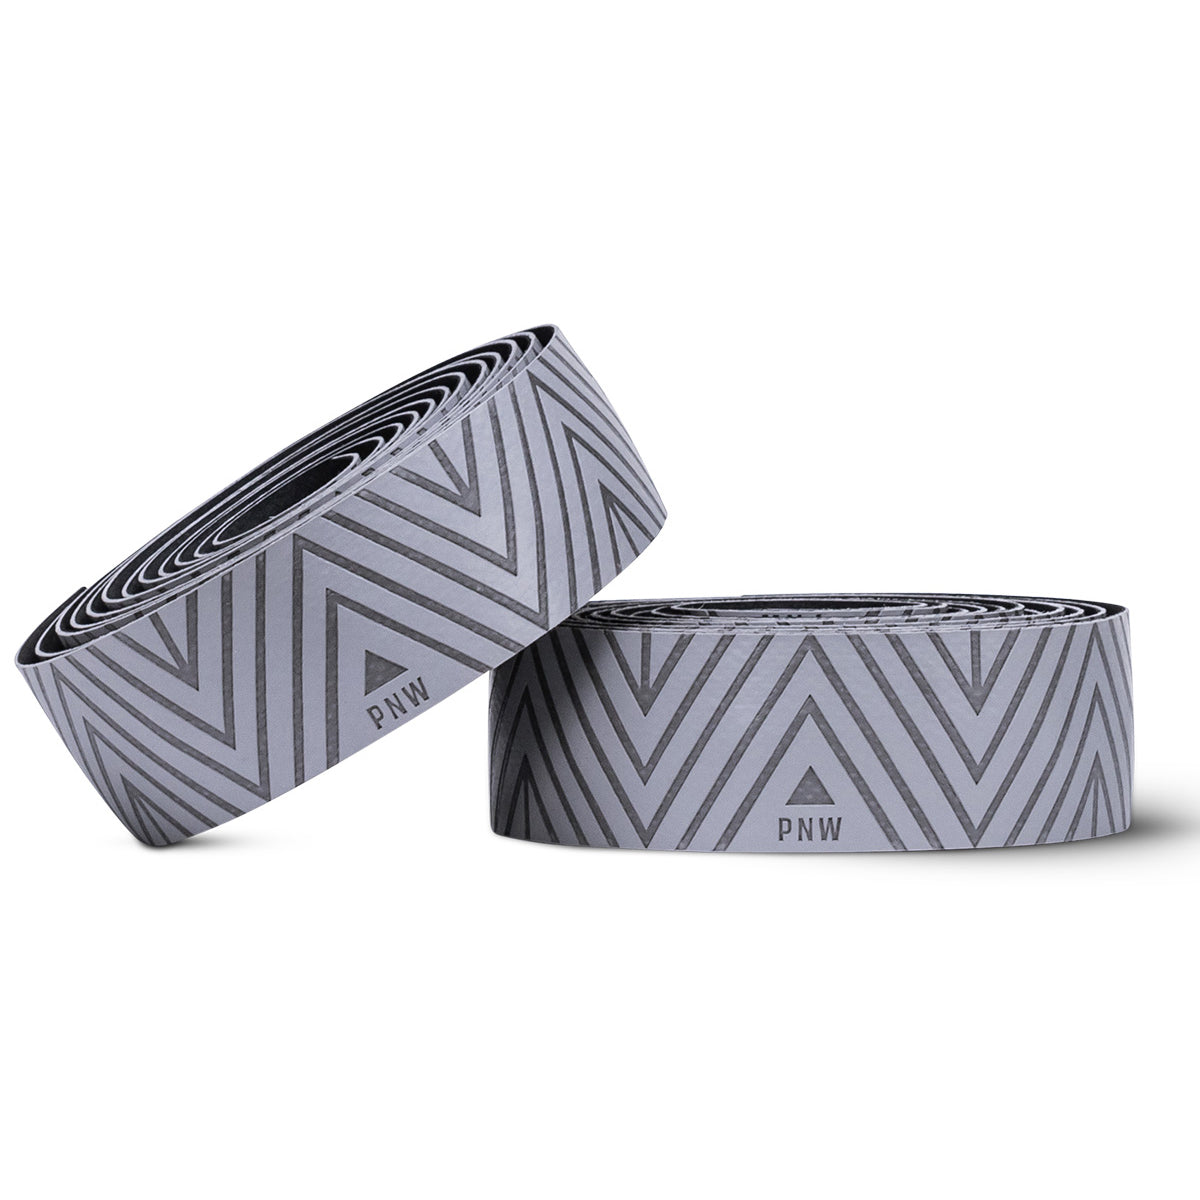 PNW Components Coast Bar Tape - Cement Grey